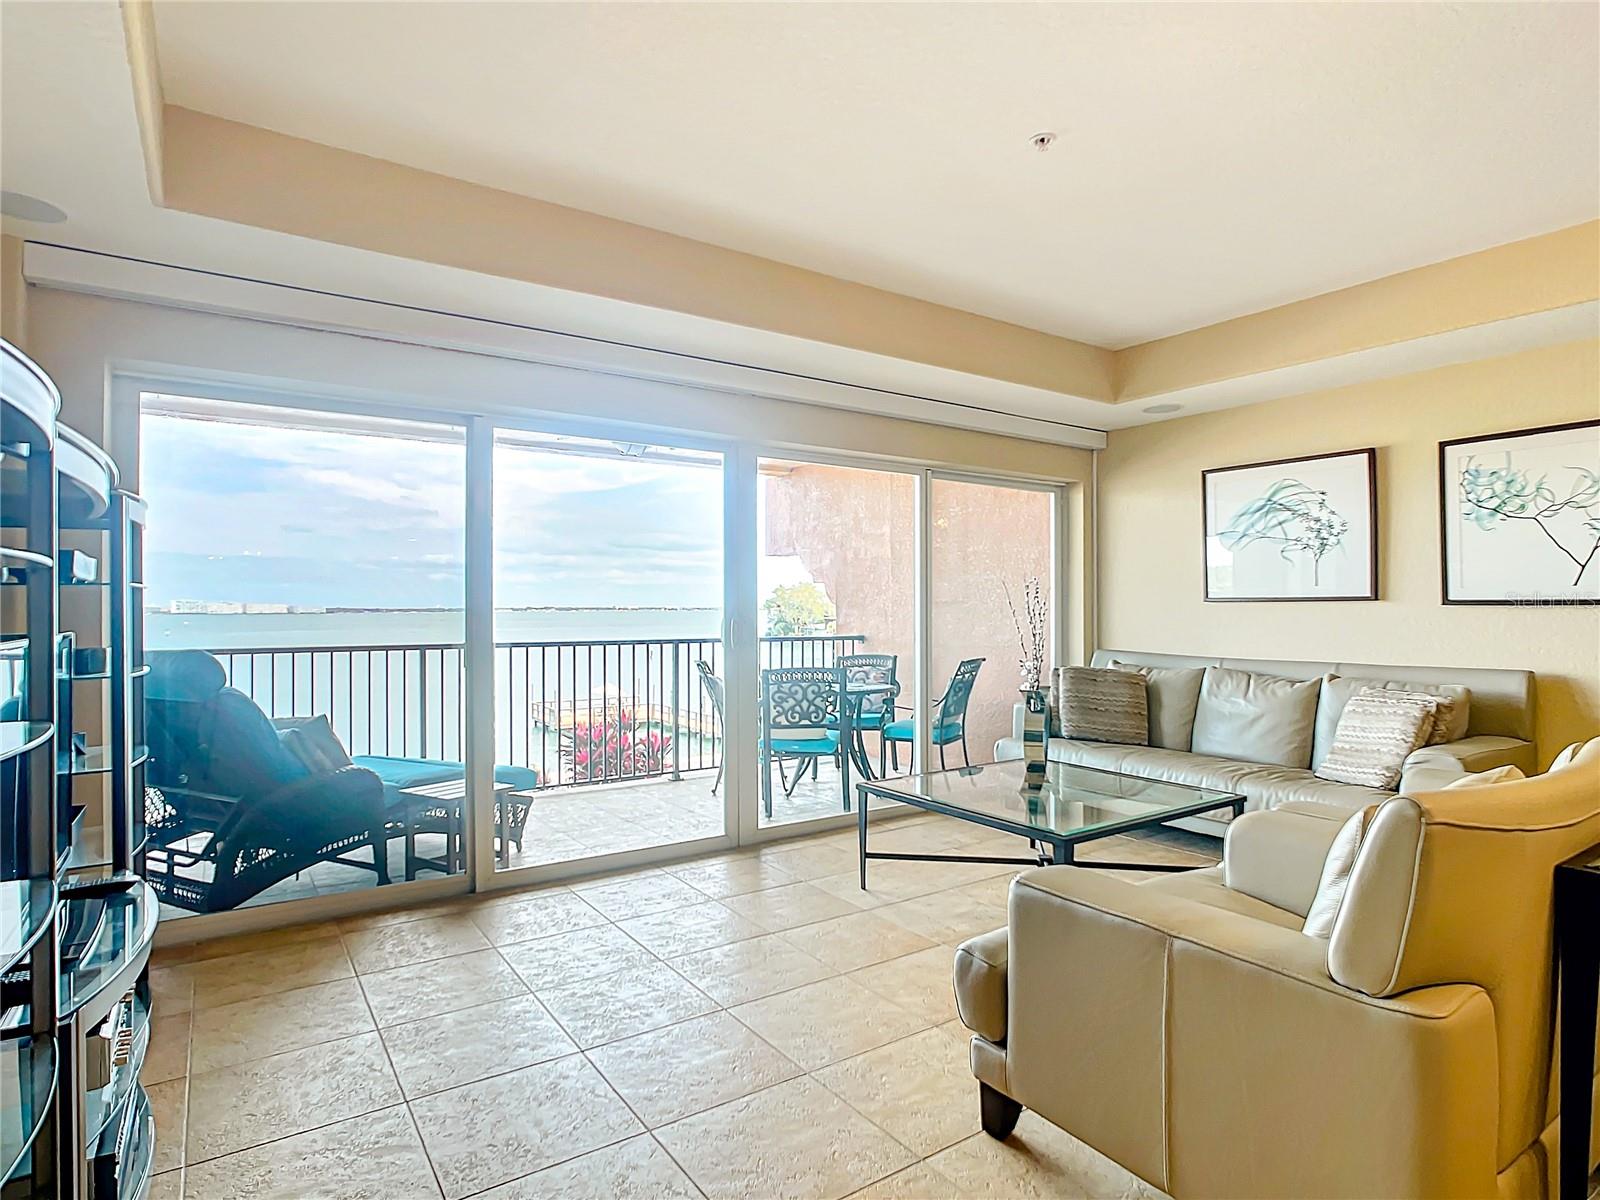 Great views from the living area looking out to your large balcony and the open water